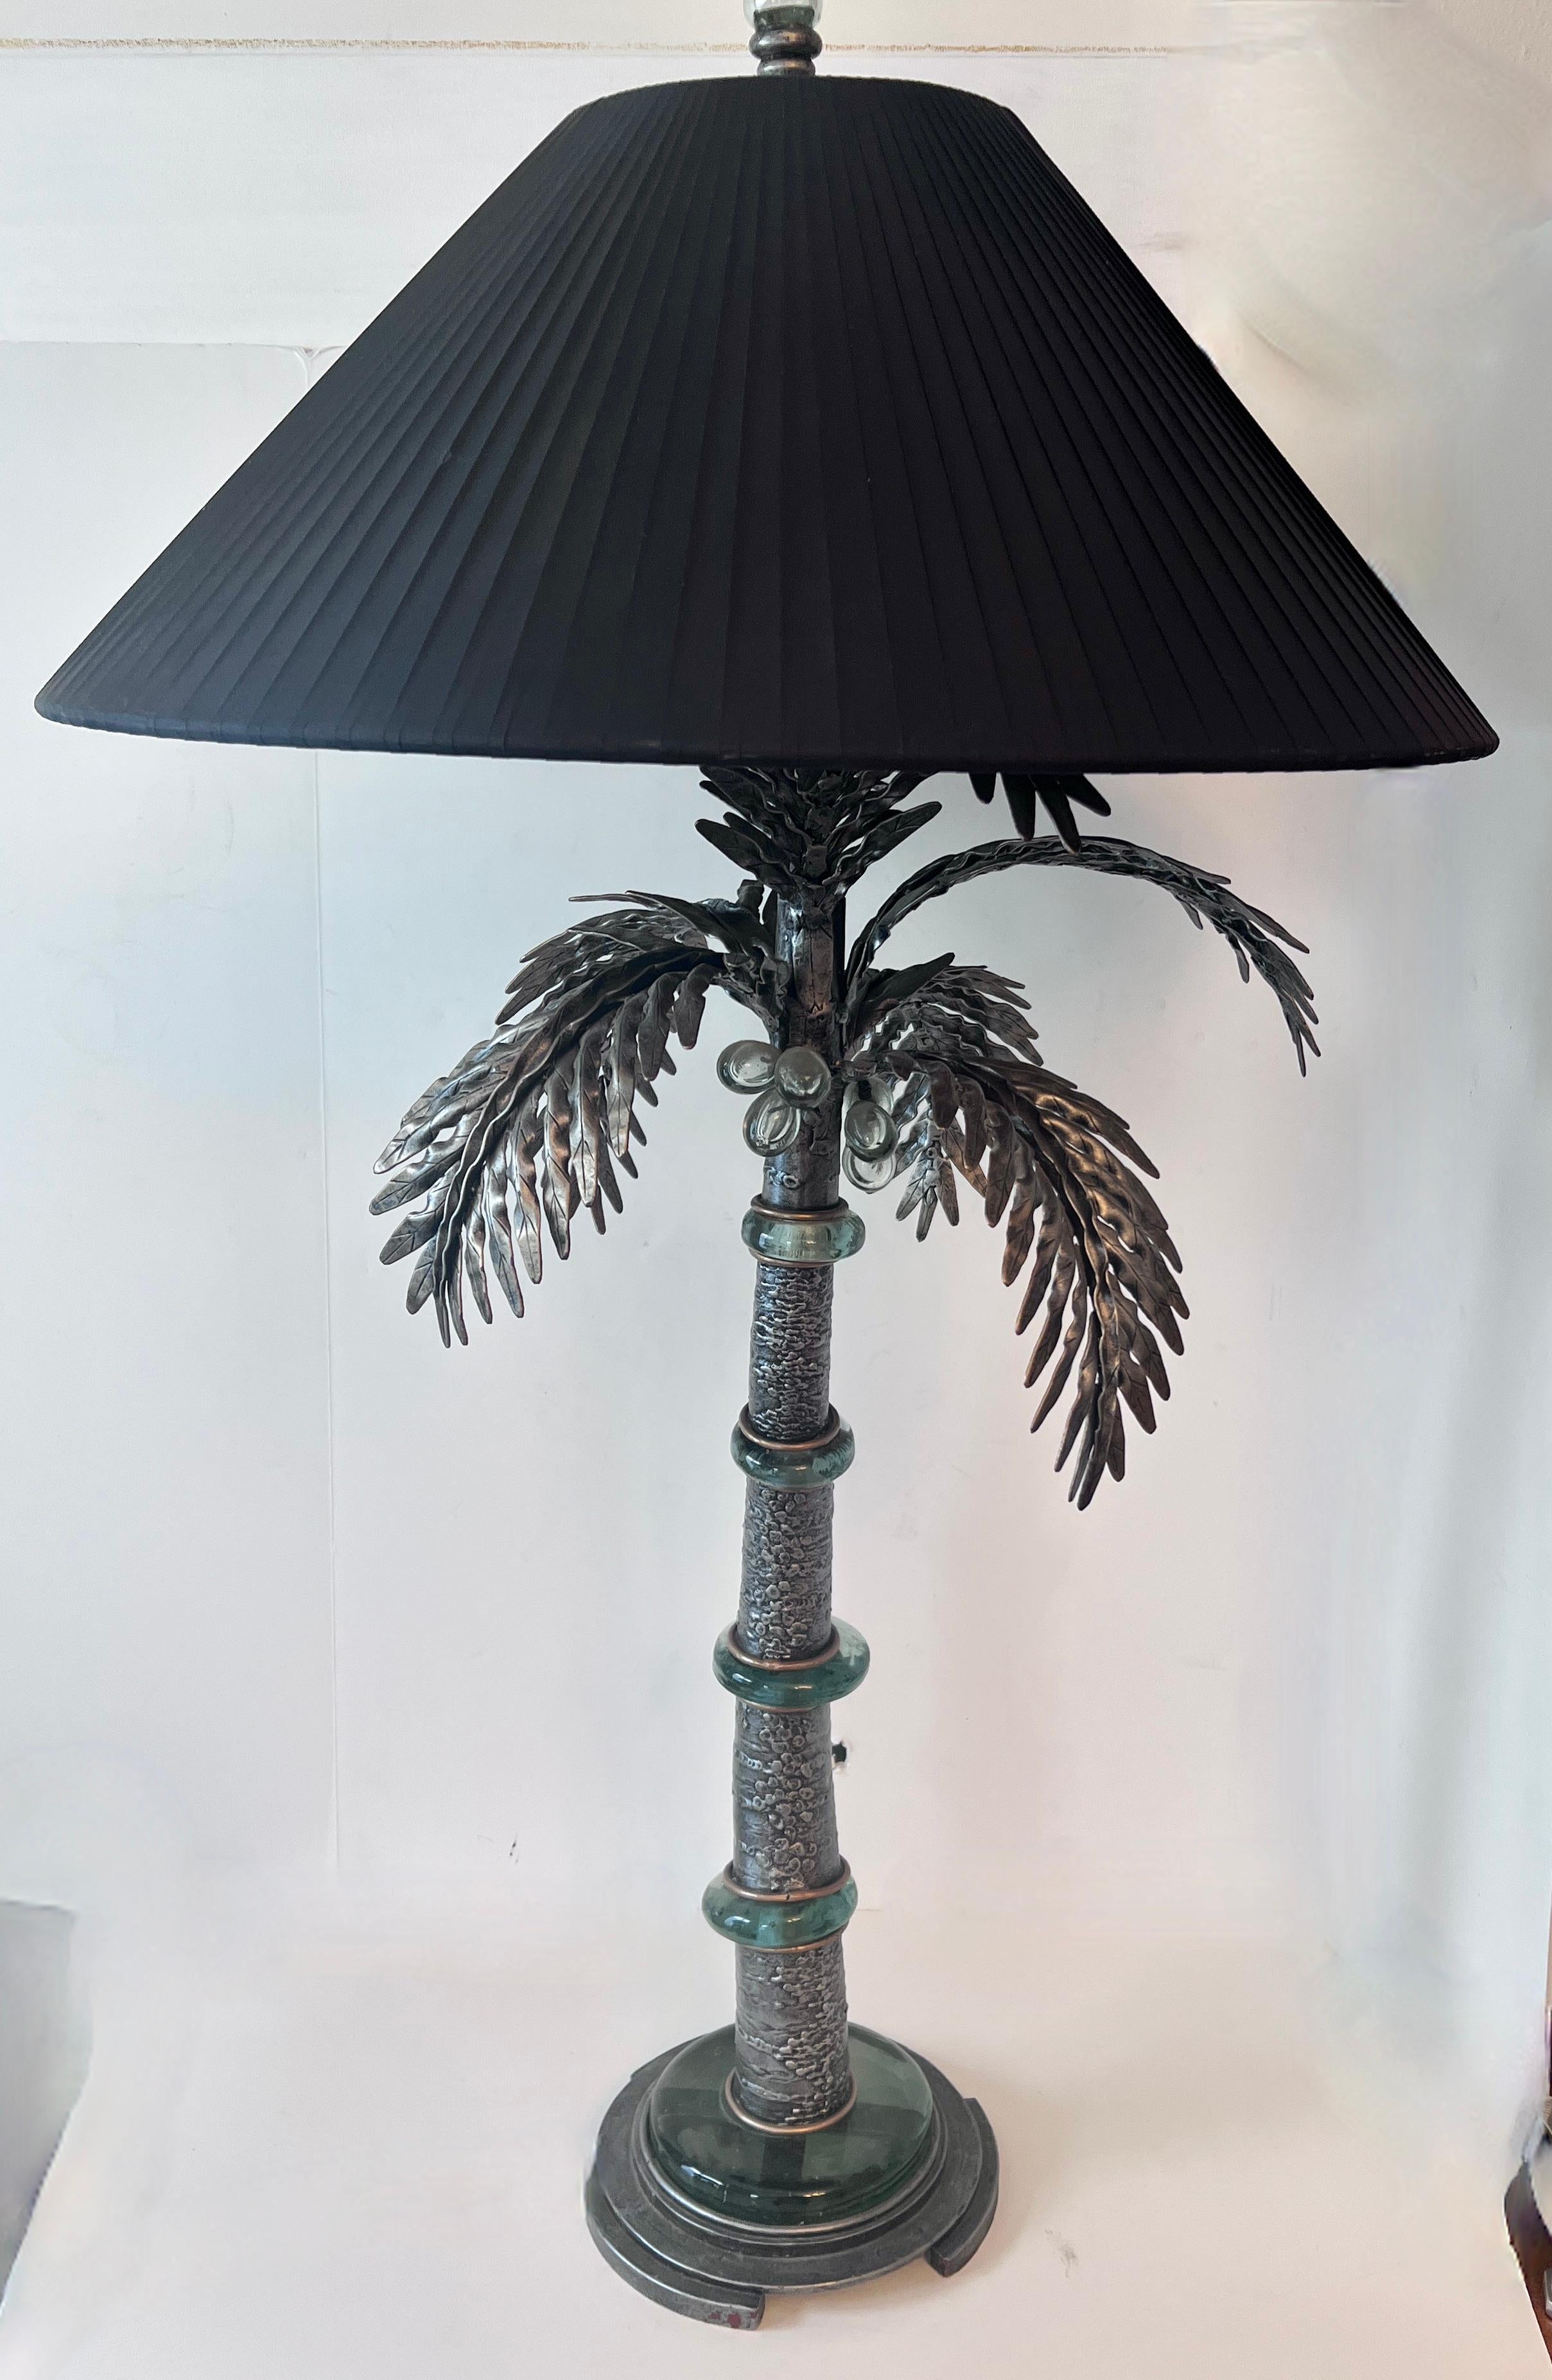 A beautifully designed and unique table lamp in the style and shape of a Palm Tree.

The lamp core is fabricated of metal with a glazed finish.  The curves in the palm are in segments separated by a thick cast green art glass - the top of the tree